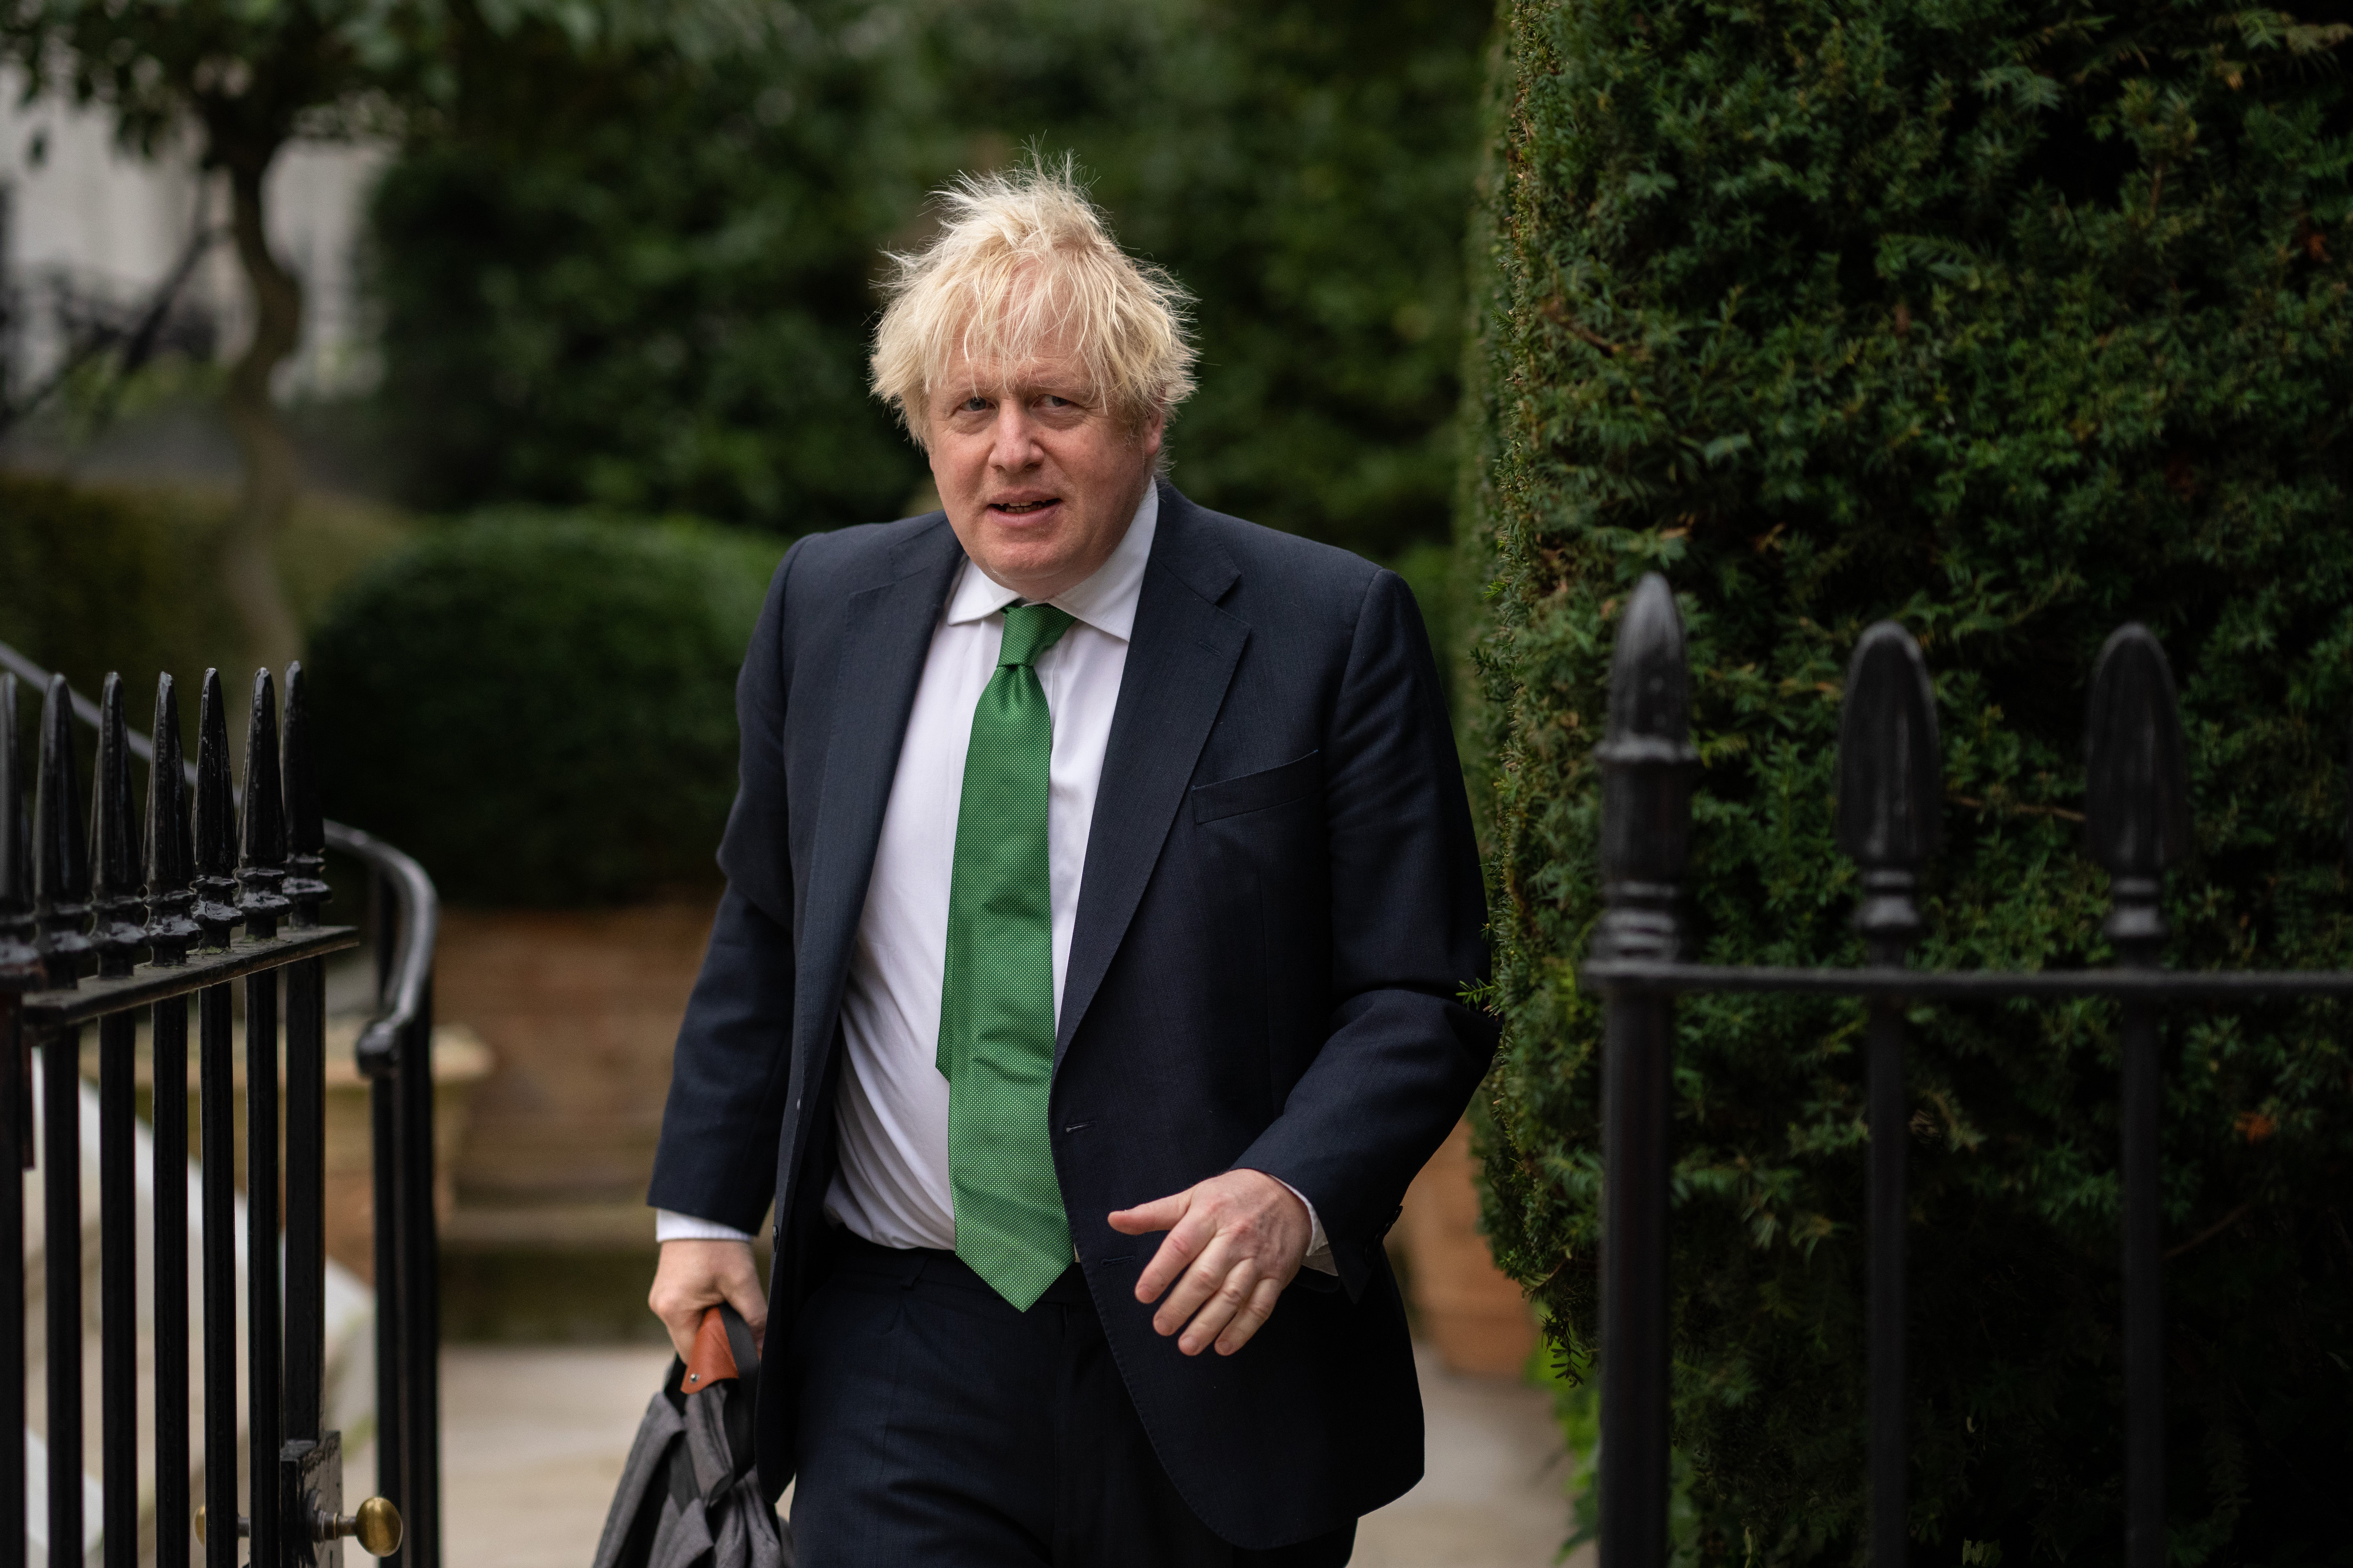 An opinion poll funded by Judith McAlpine, a wealthy Conservative activist, suggested Boris Johnson would be the most electable replacement for Rishi Sunak as party leader